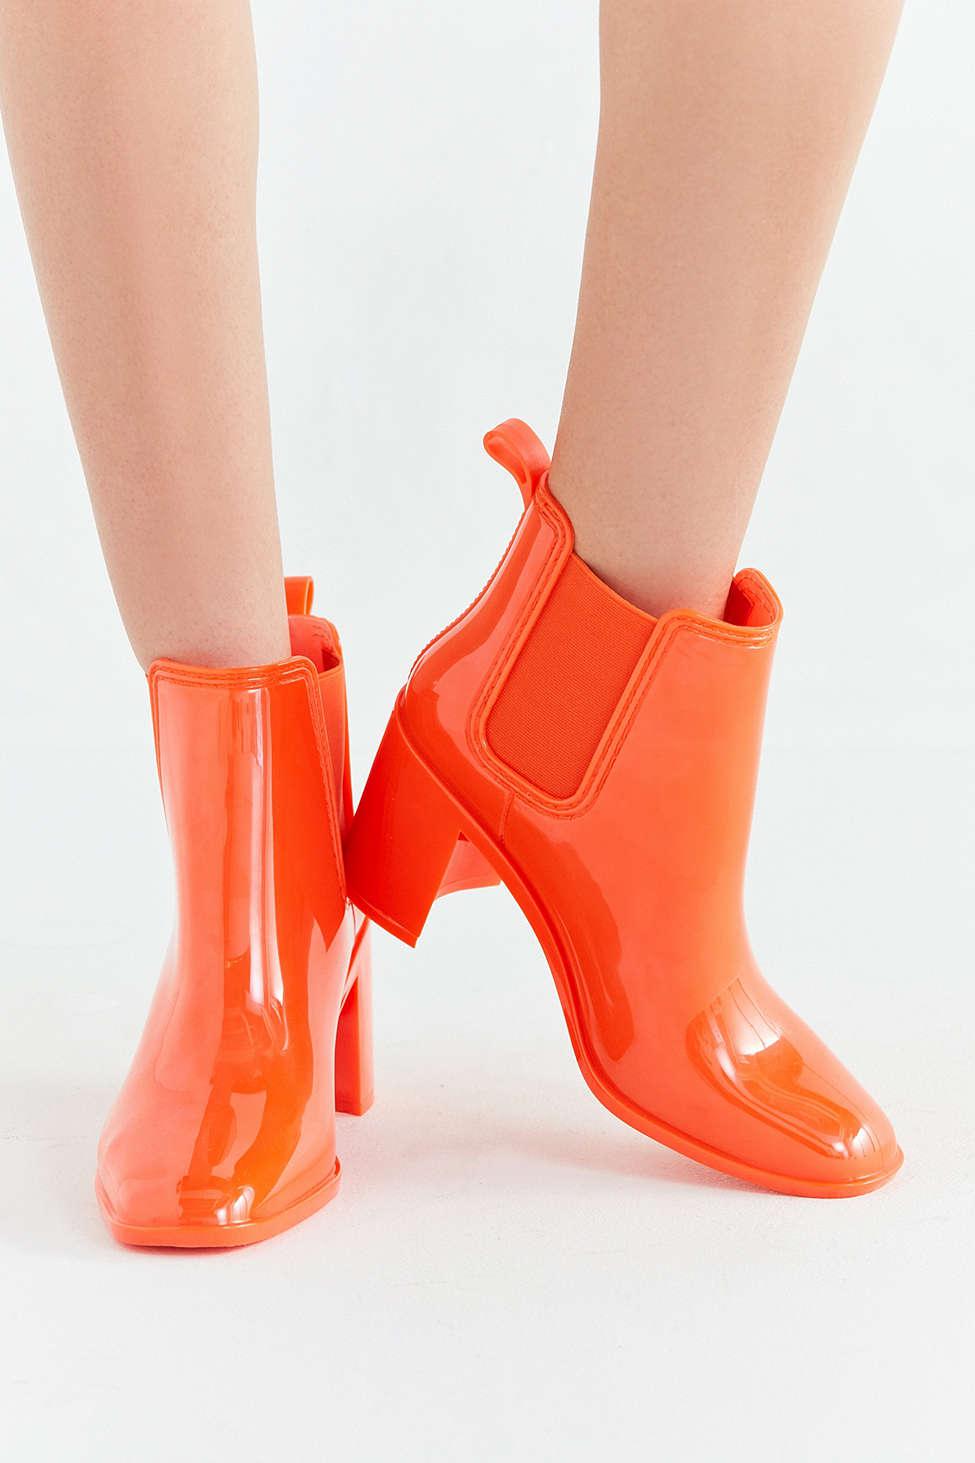 Details about   Jeffrey Campbell Women's HURRICANE Rain Boots Red Shiny New